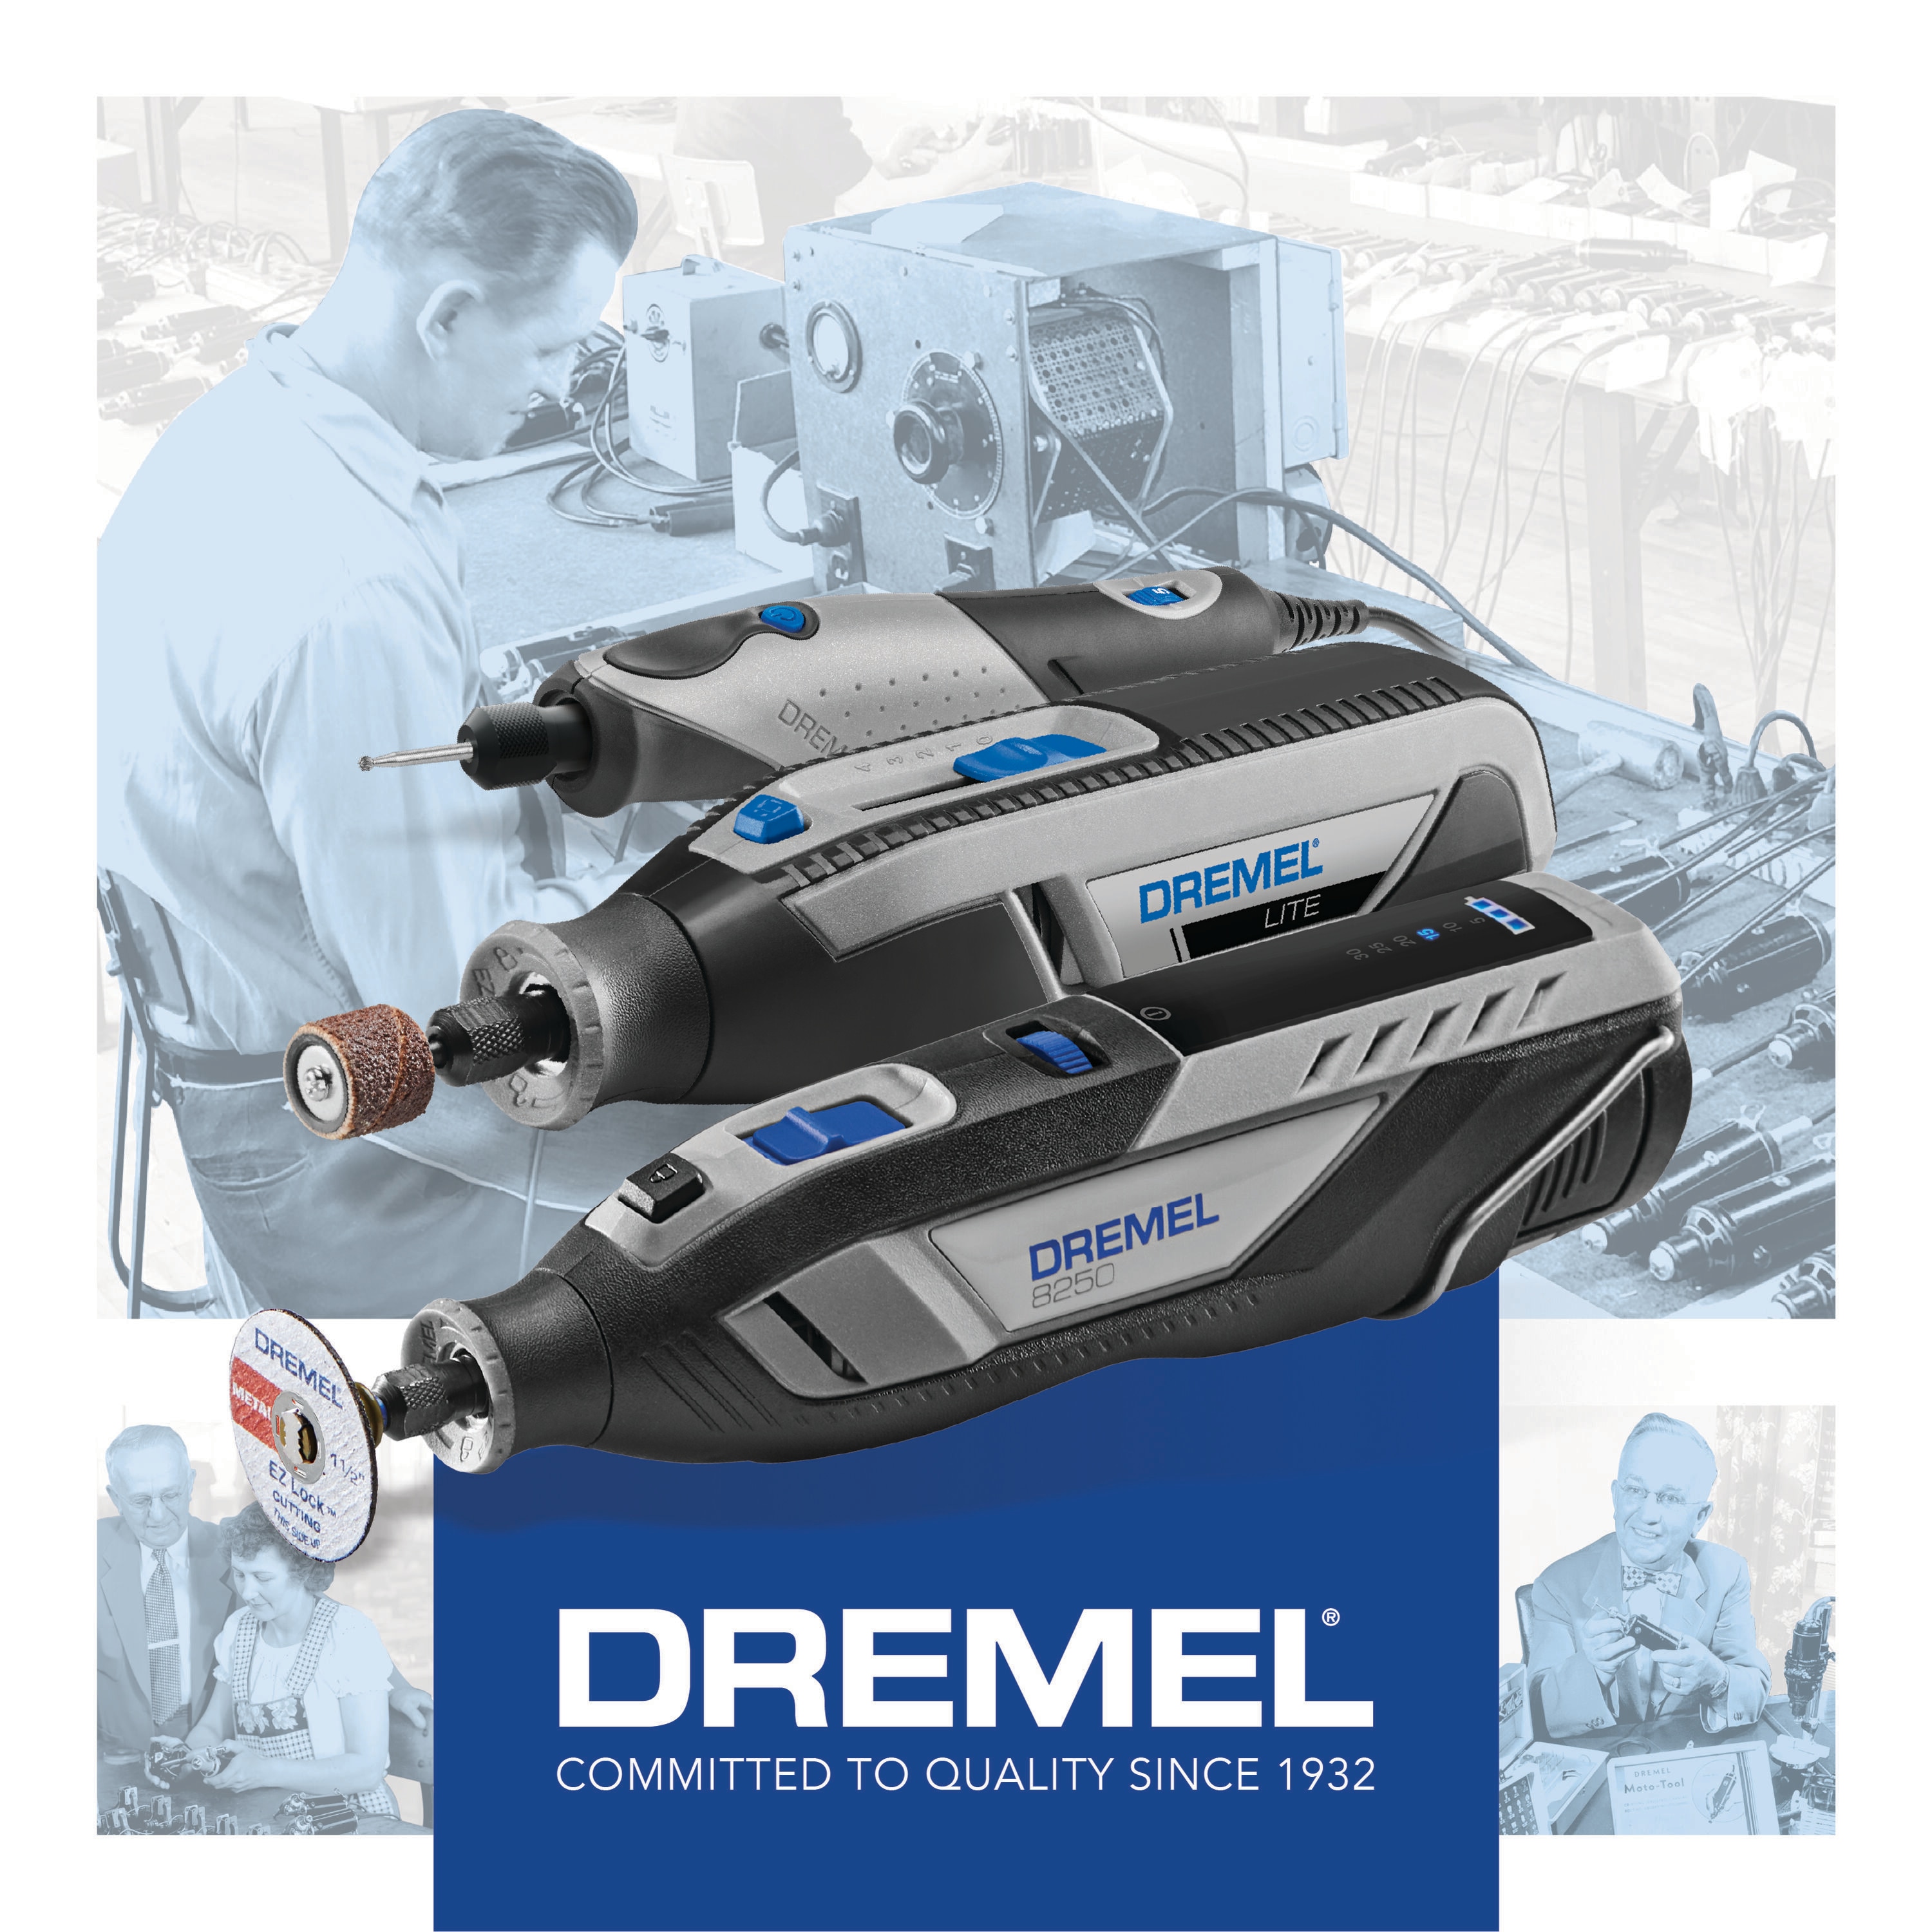 Dremel 8220-2/28 12-Volt Review and Compared to Black & Decker RTX 4K 